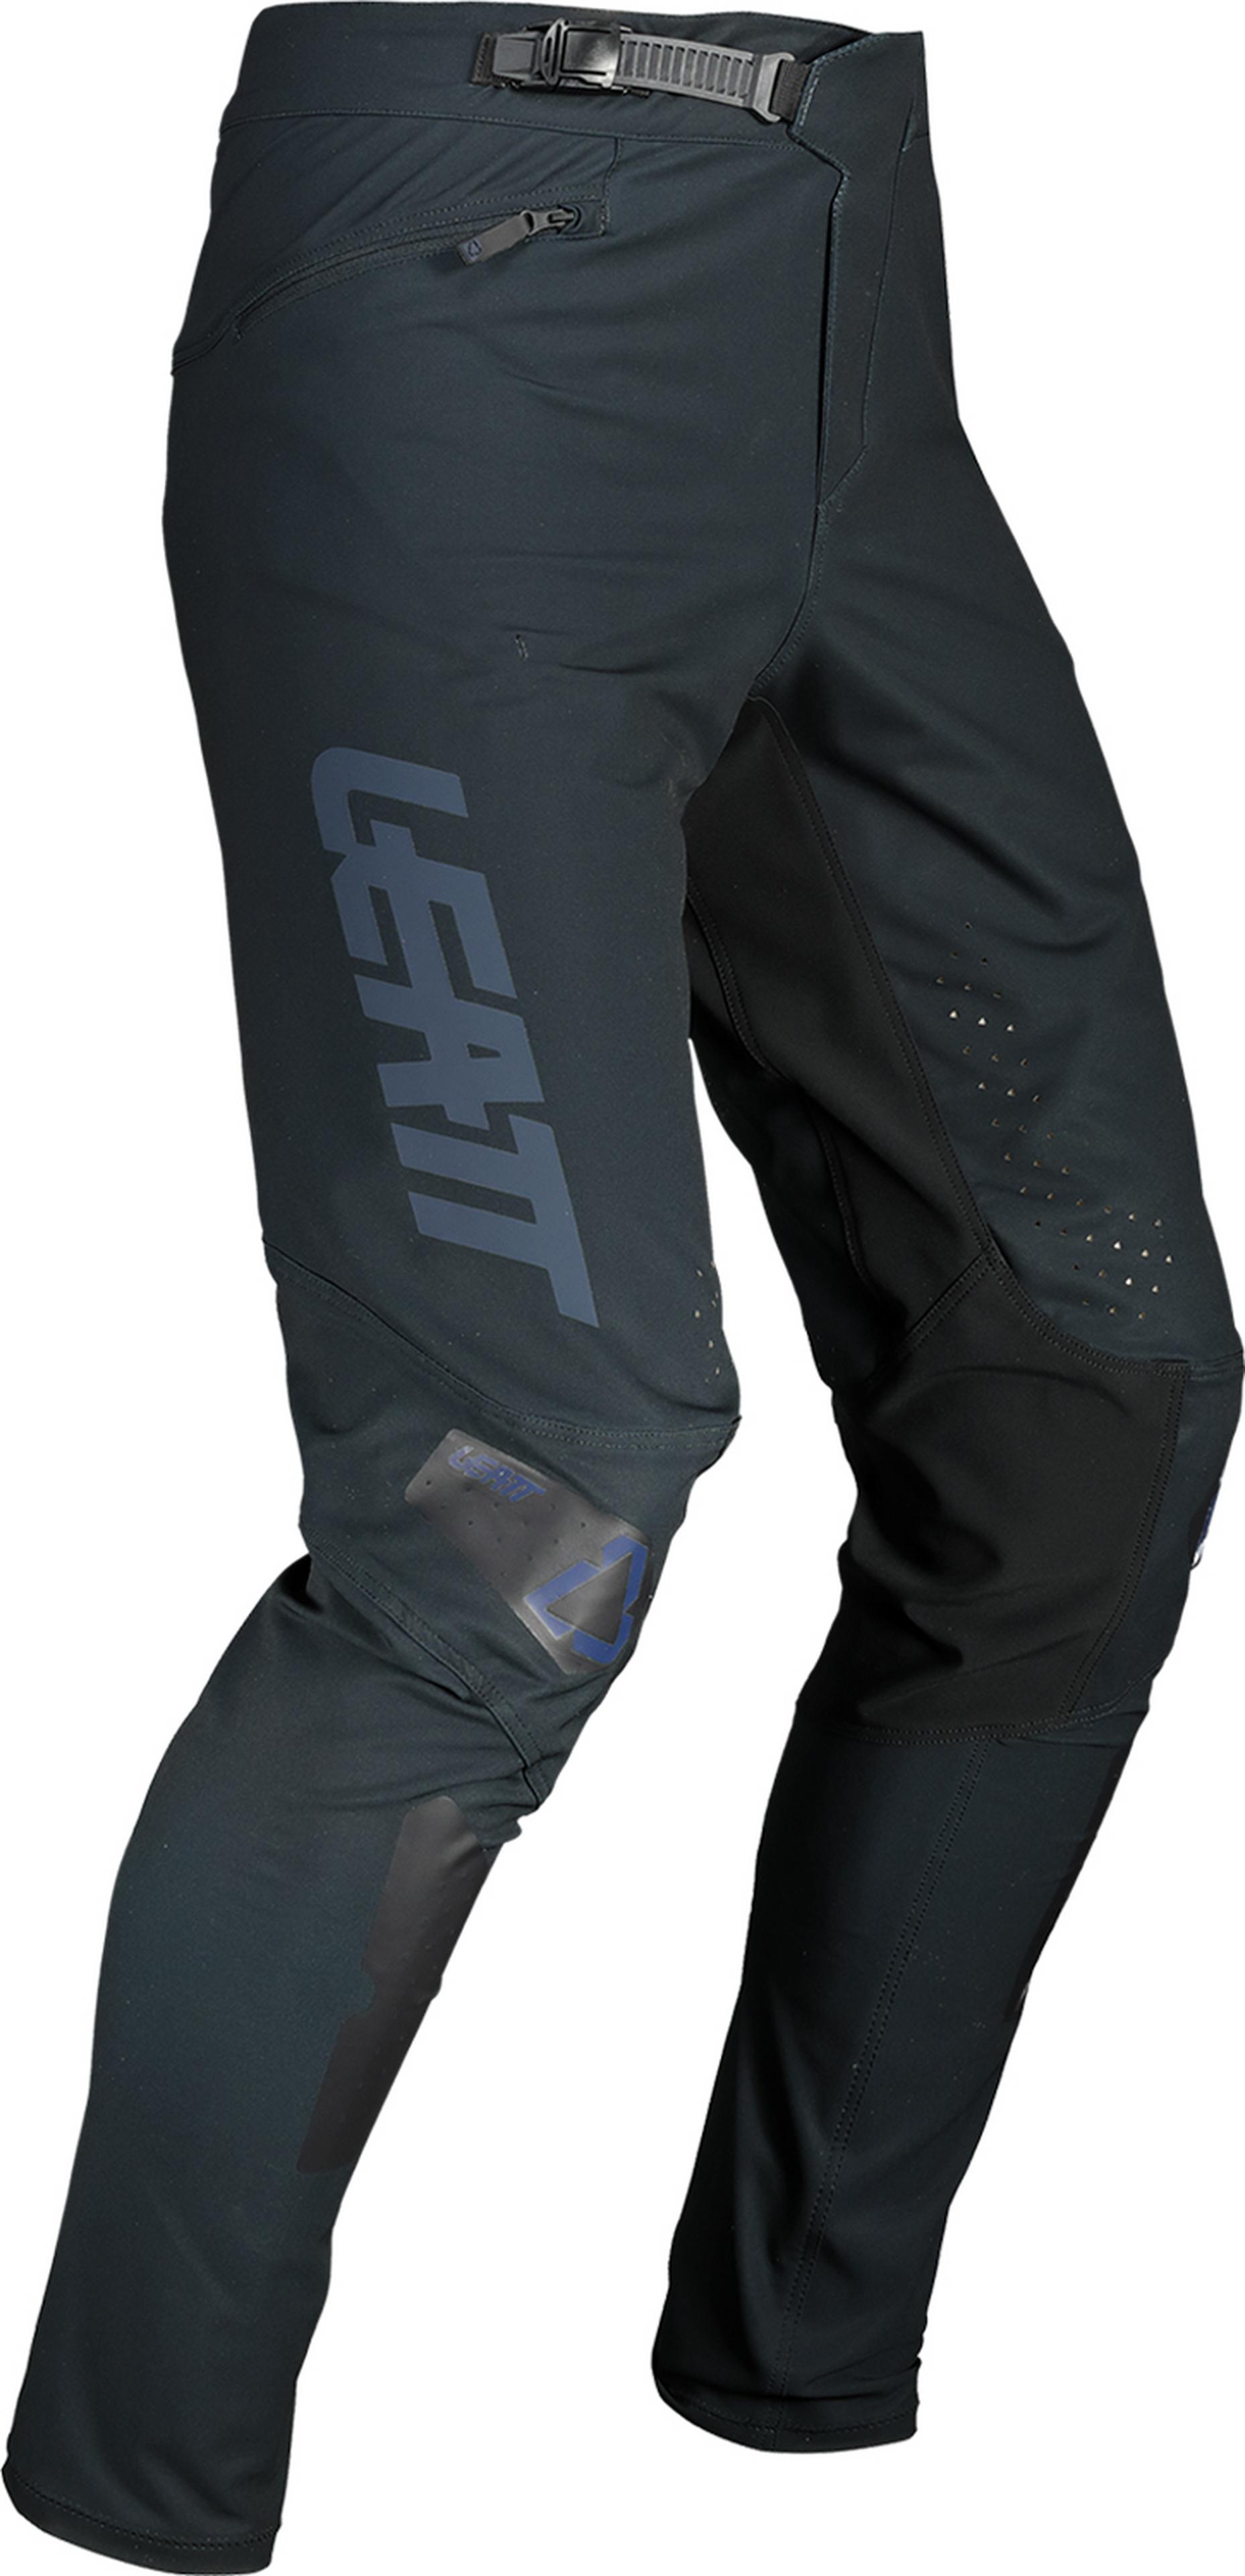 Leatt MTB 4.0 gravity pants, The ultimate ultra-light & comfortable  four-way stretch 4.0 gravity pants that have all the features you need!  😎🤘 #Leatt2022MTB 👉